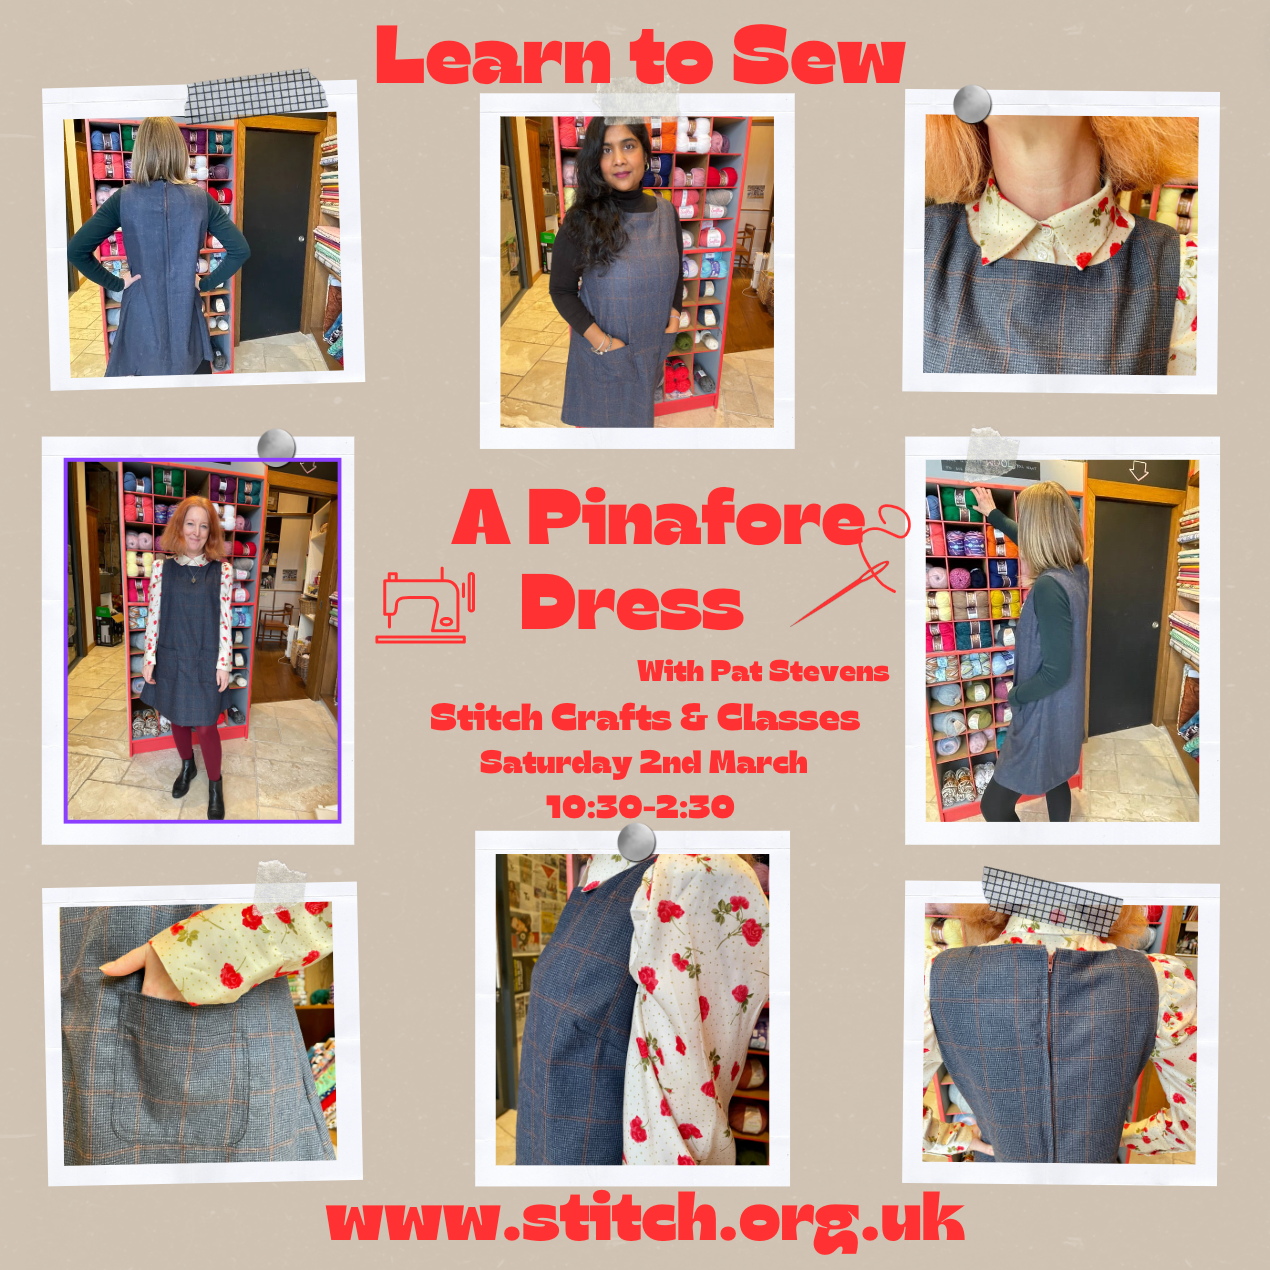 poster or flyer advertising event Learn to Sew a Pinafore Dress